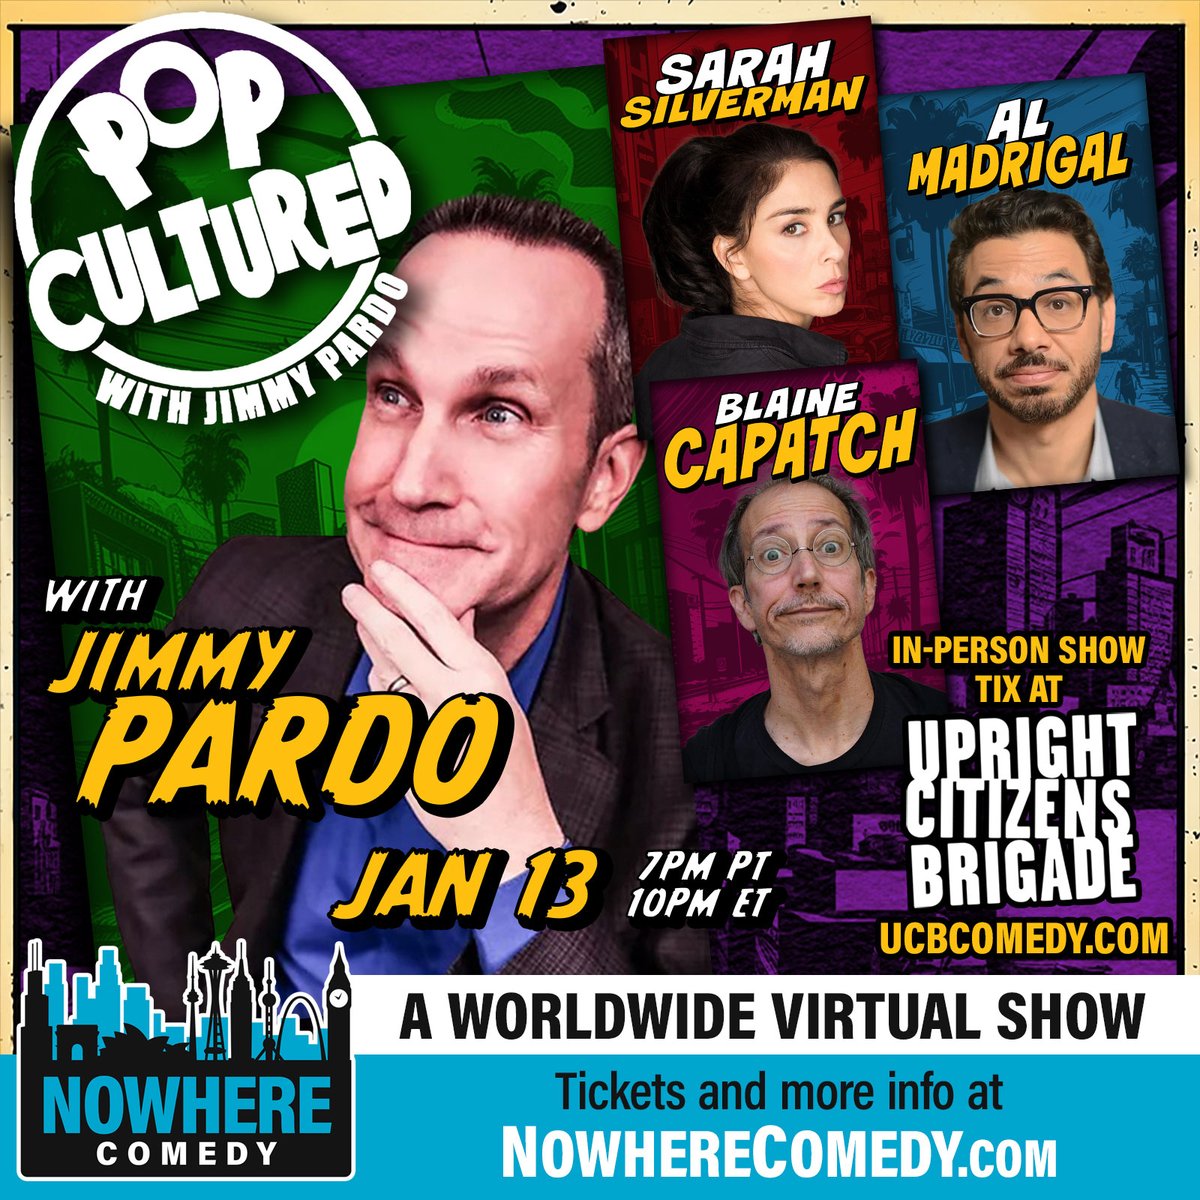 Tonight's the night! Dive into a comedy fest with #PopCultured, hosted by @jimmypardo. Enjoy laughs with stars @SarahKSilverman, @almadrigal, @blainecapatch. Hilarious games & non-stop fun at NowhereComedy.com! #ComedyNight